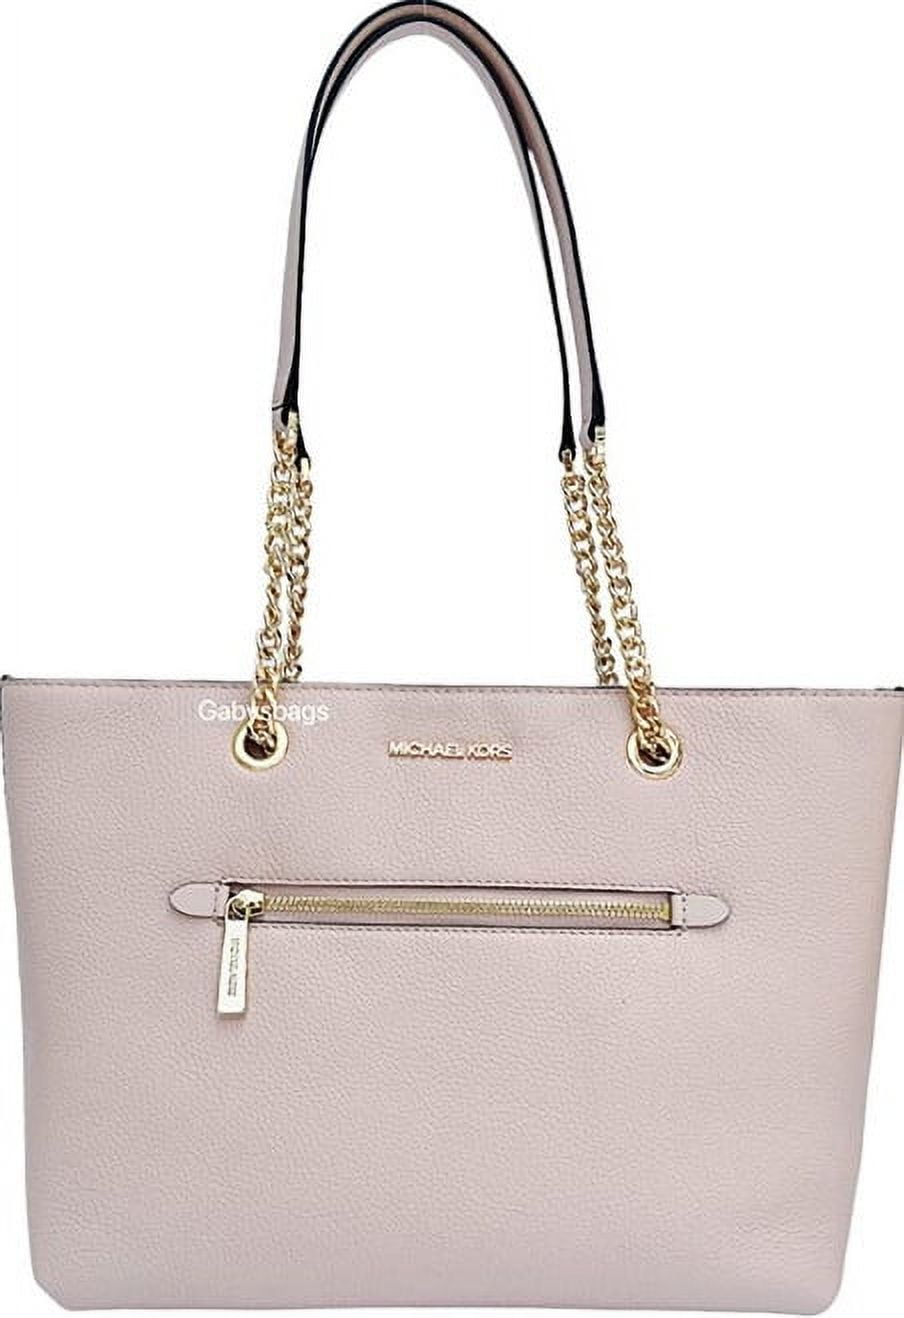 Michael Kors Jet Set Top Zip Tote Bag with Tech Set Small Brown  Signature/Powder Blush in PVC/Leather with Gold-tone - US